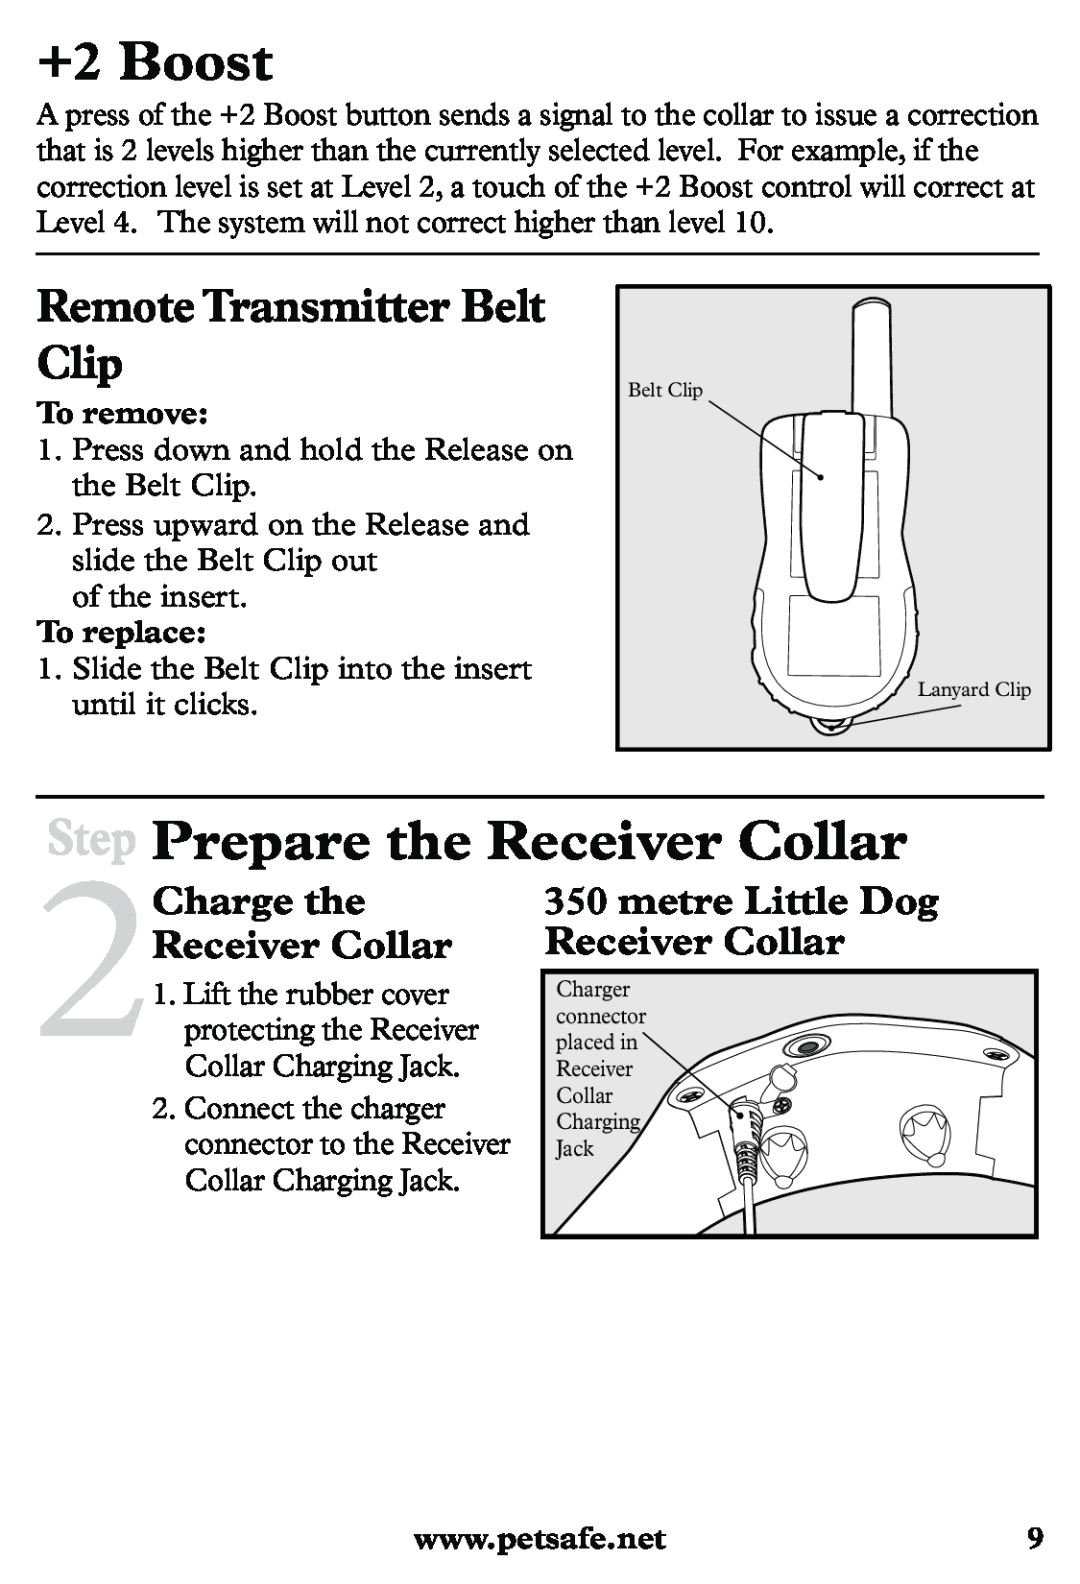 Petsafe PDT20-11939 +2 Boost, Step Prepare the Receiver Collar, Remote Transmitter Belt Clip, 2Charge the Receiver Collar 